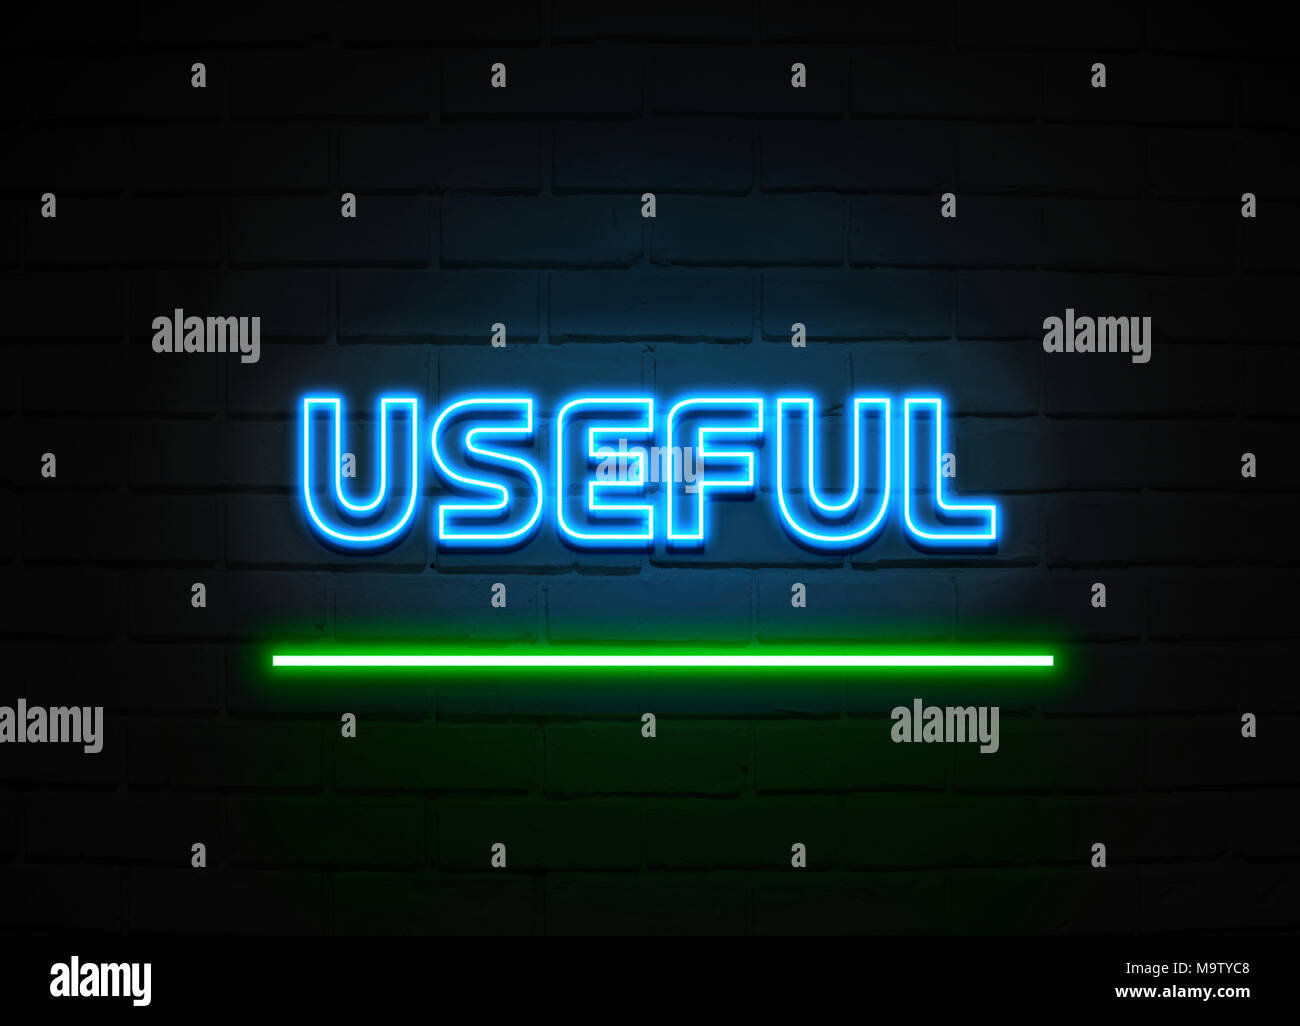 Useful neon sign - Glowing Neon Sign on brickwall wall - 3D rendered royalty free stock illustration. Stock Photo